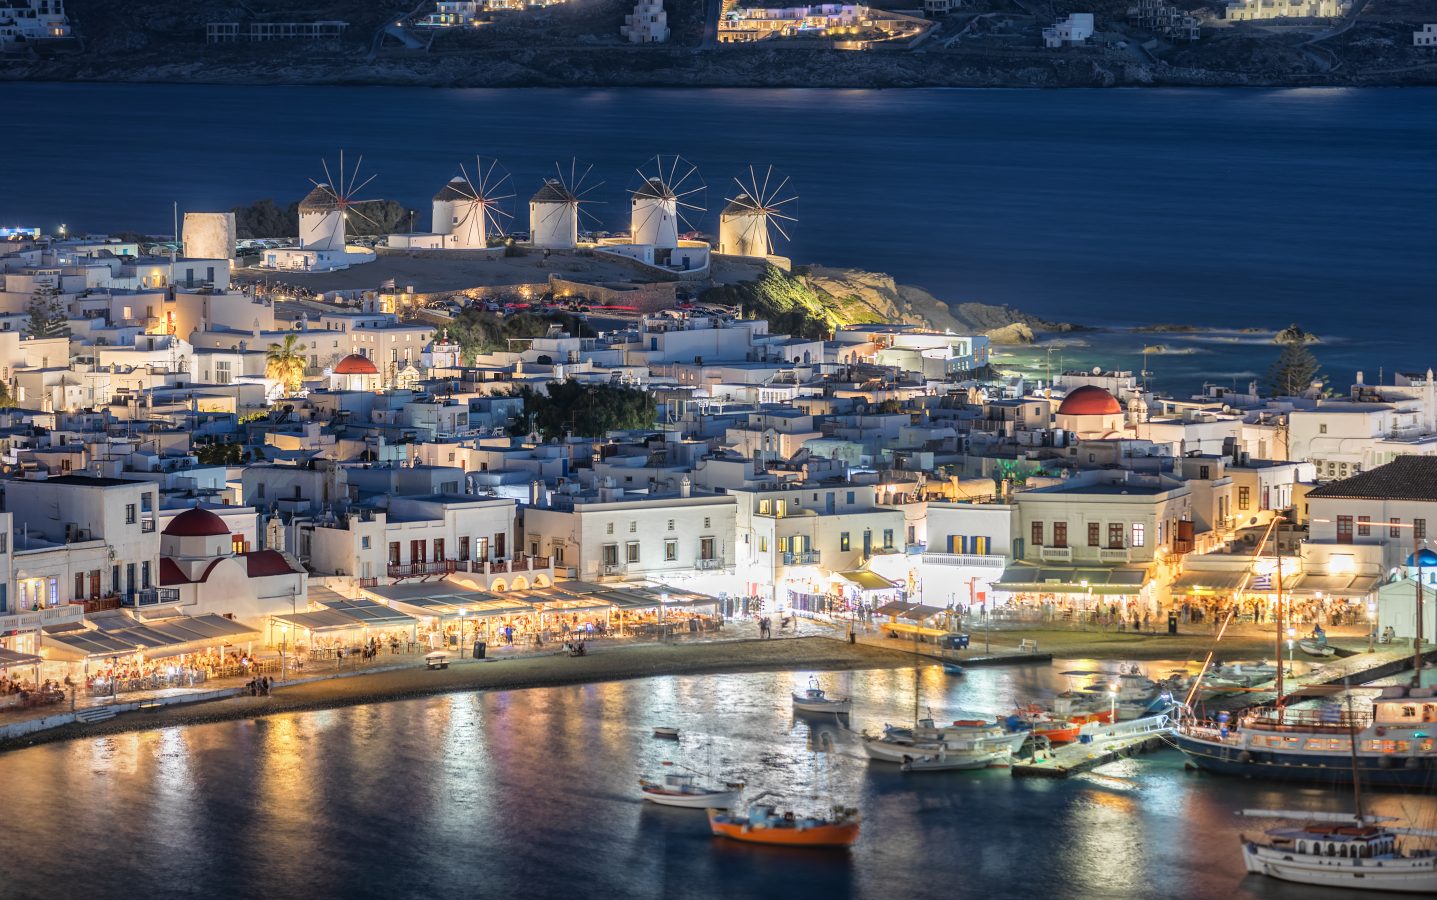 Mykonos, Greece lit up at nighttime with a large crowd of the nightlife scene along the coastline.